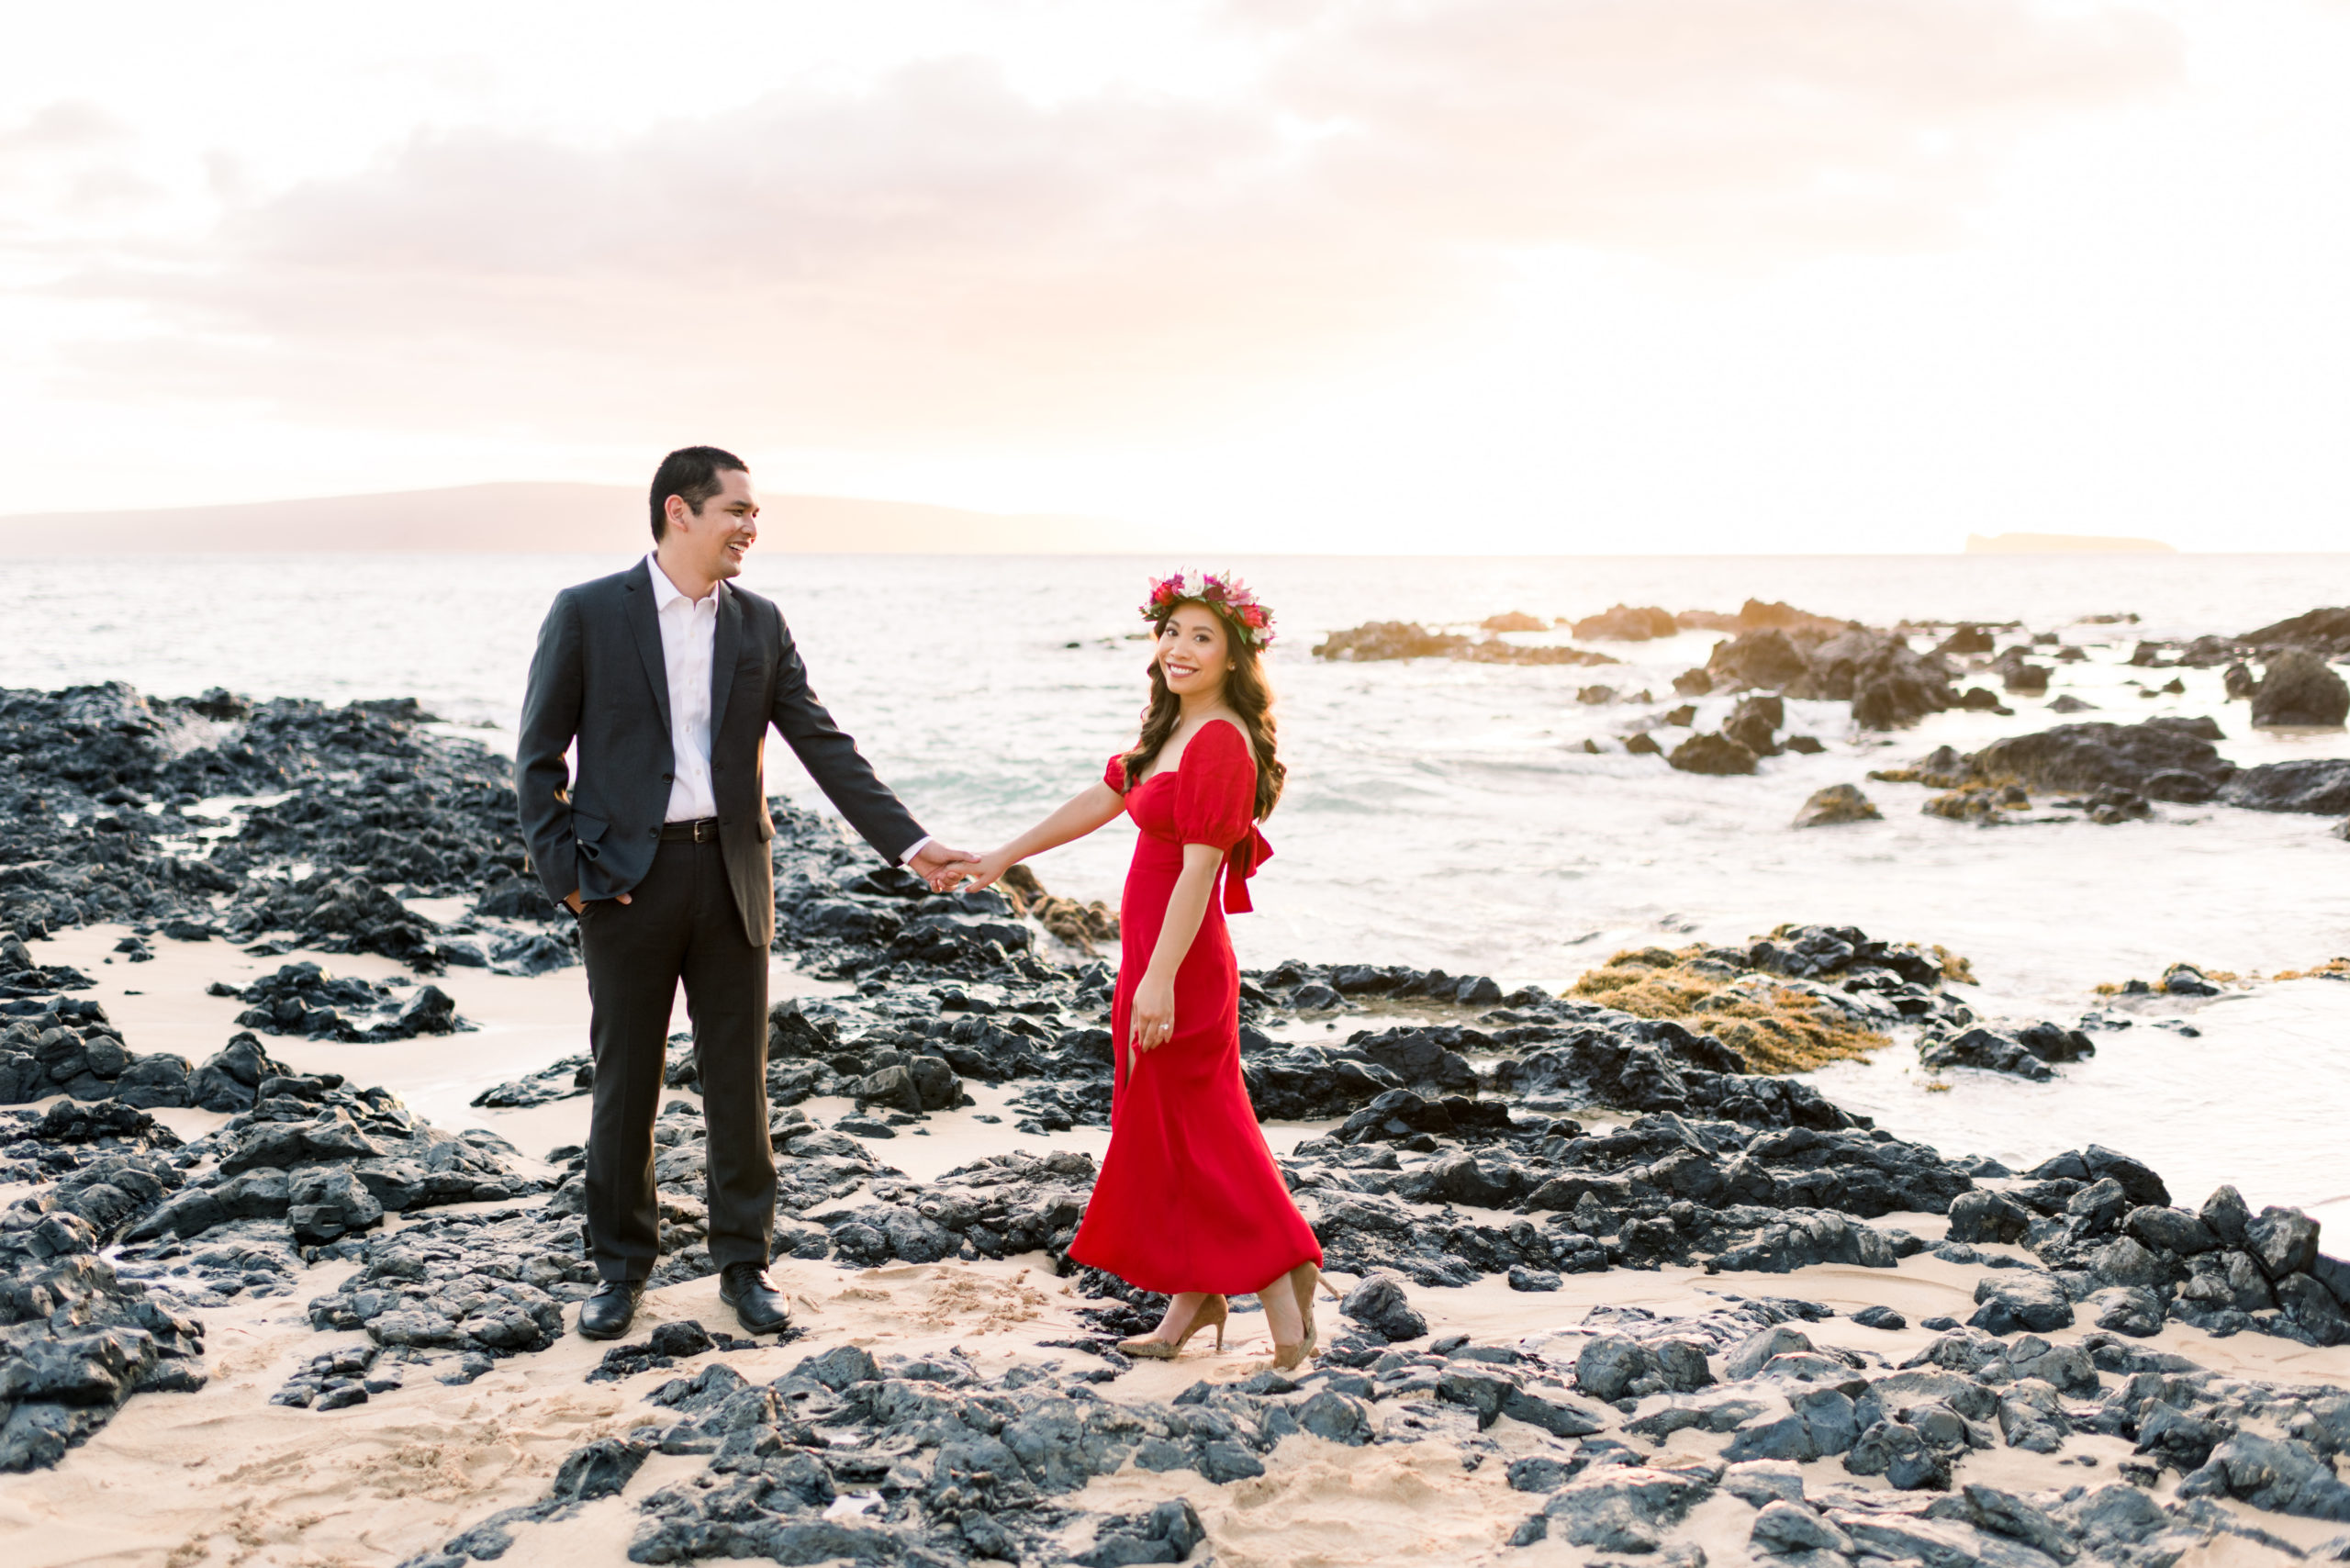 Honeymoon Couple in Maui holding hands while standing in sand and rocks during sunset.